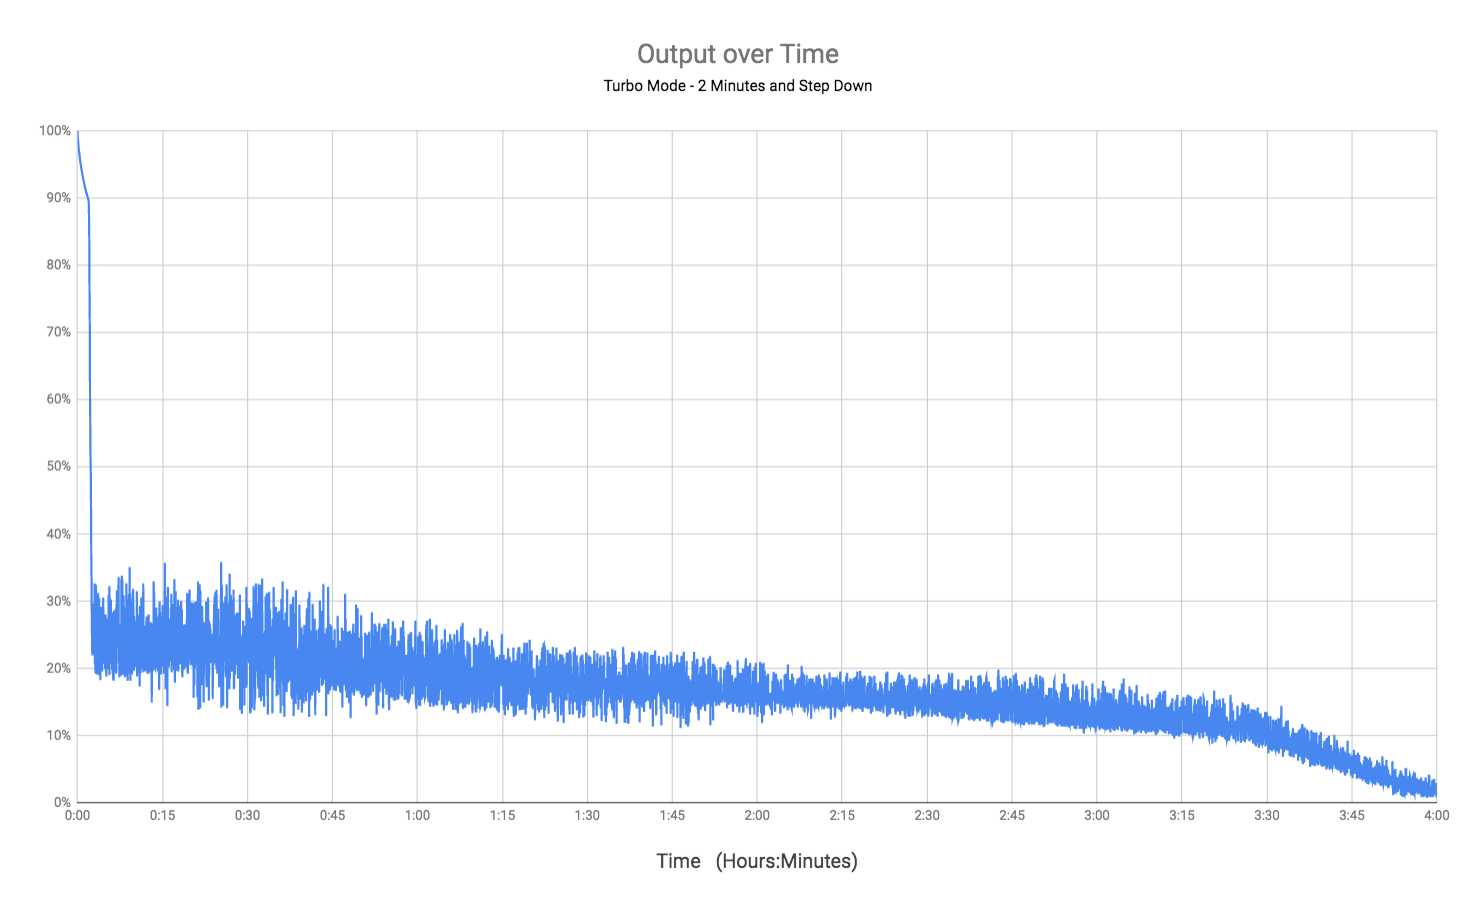 Wowtac A7 Output Over Time with Step Down